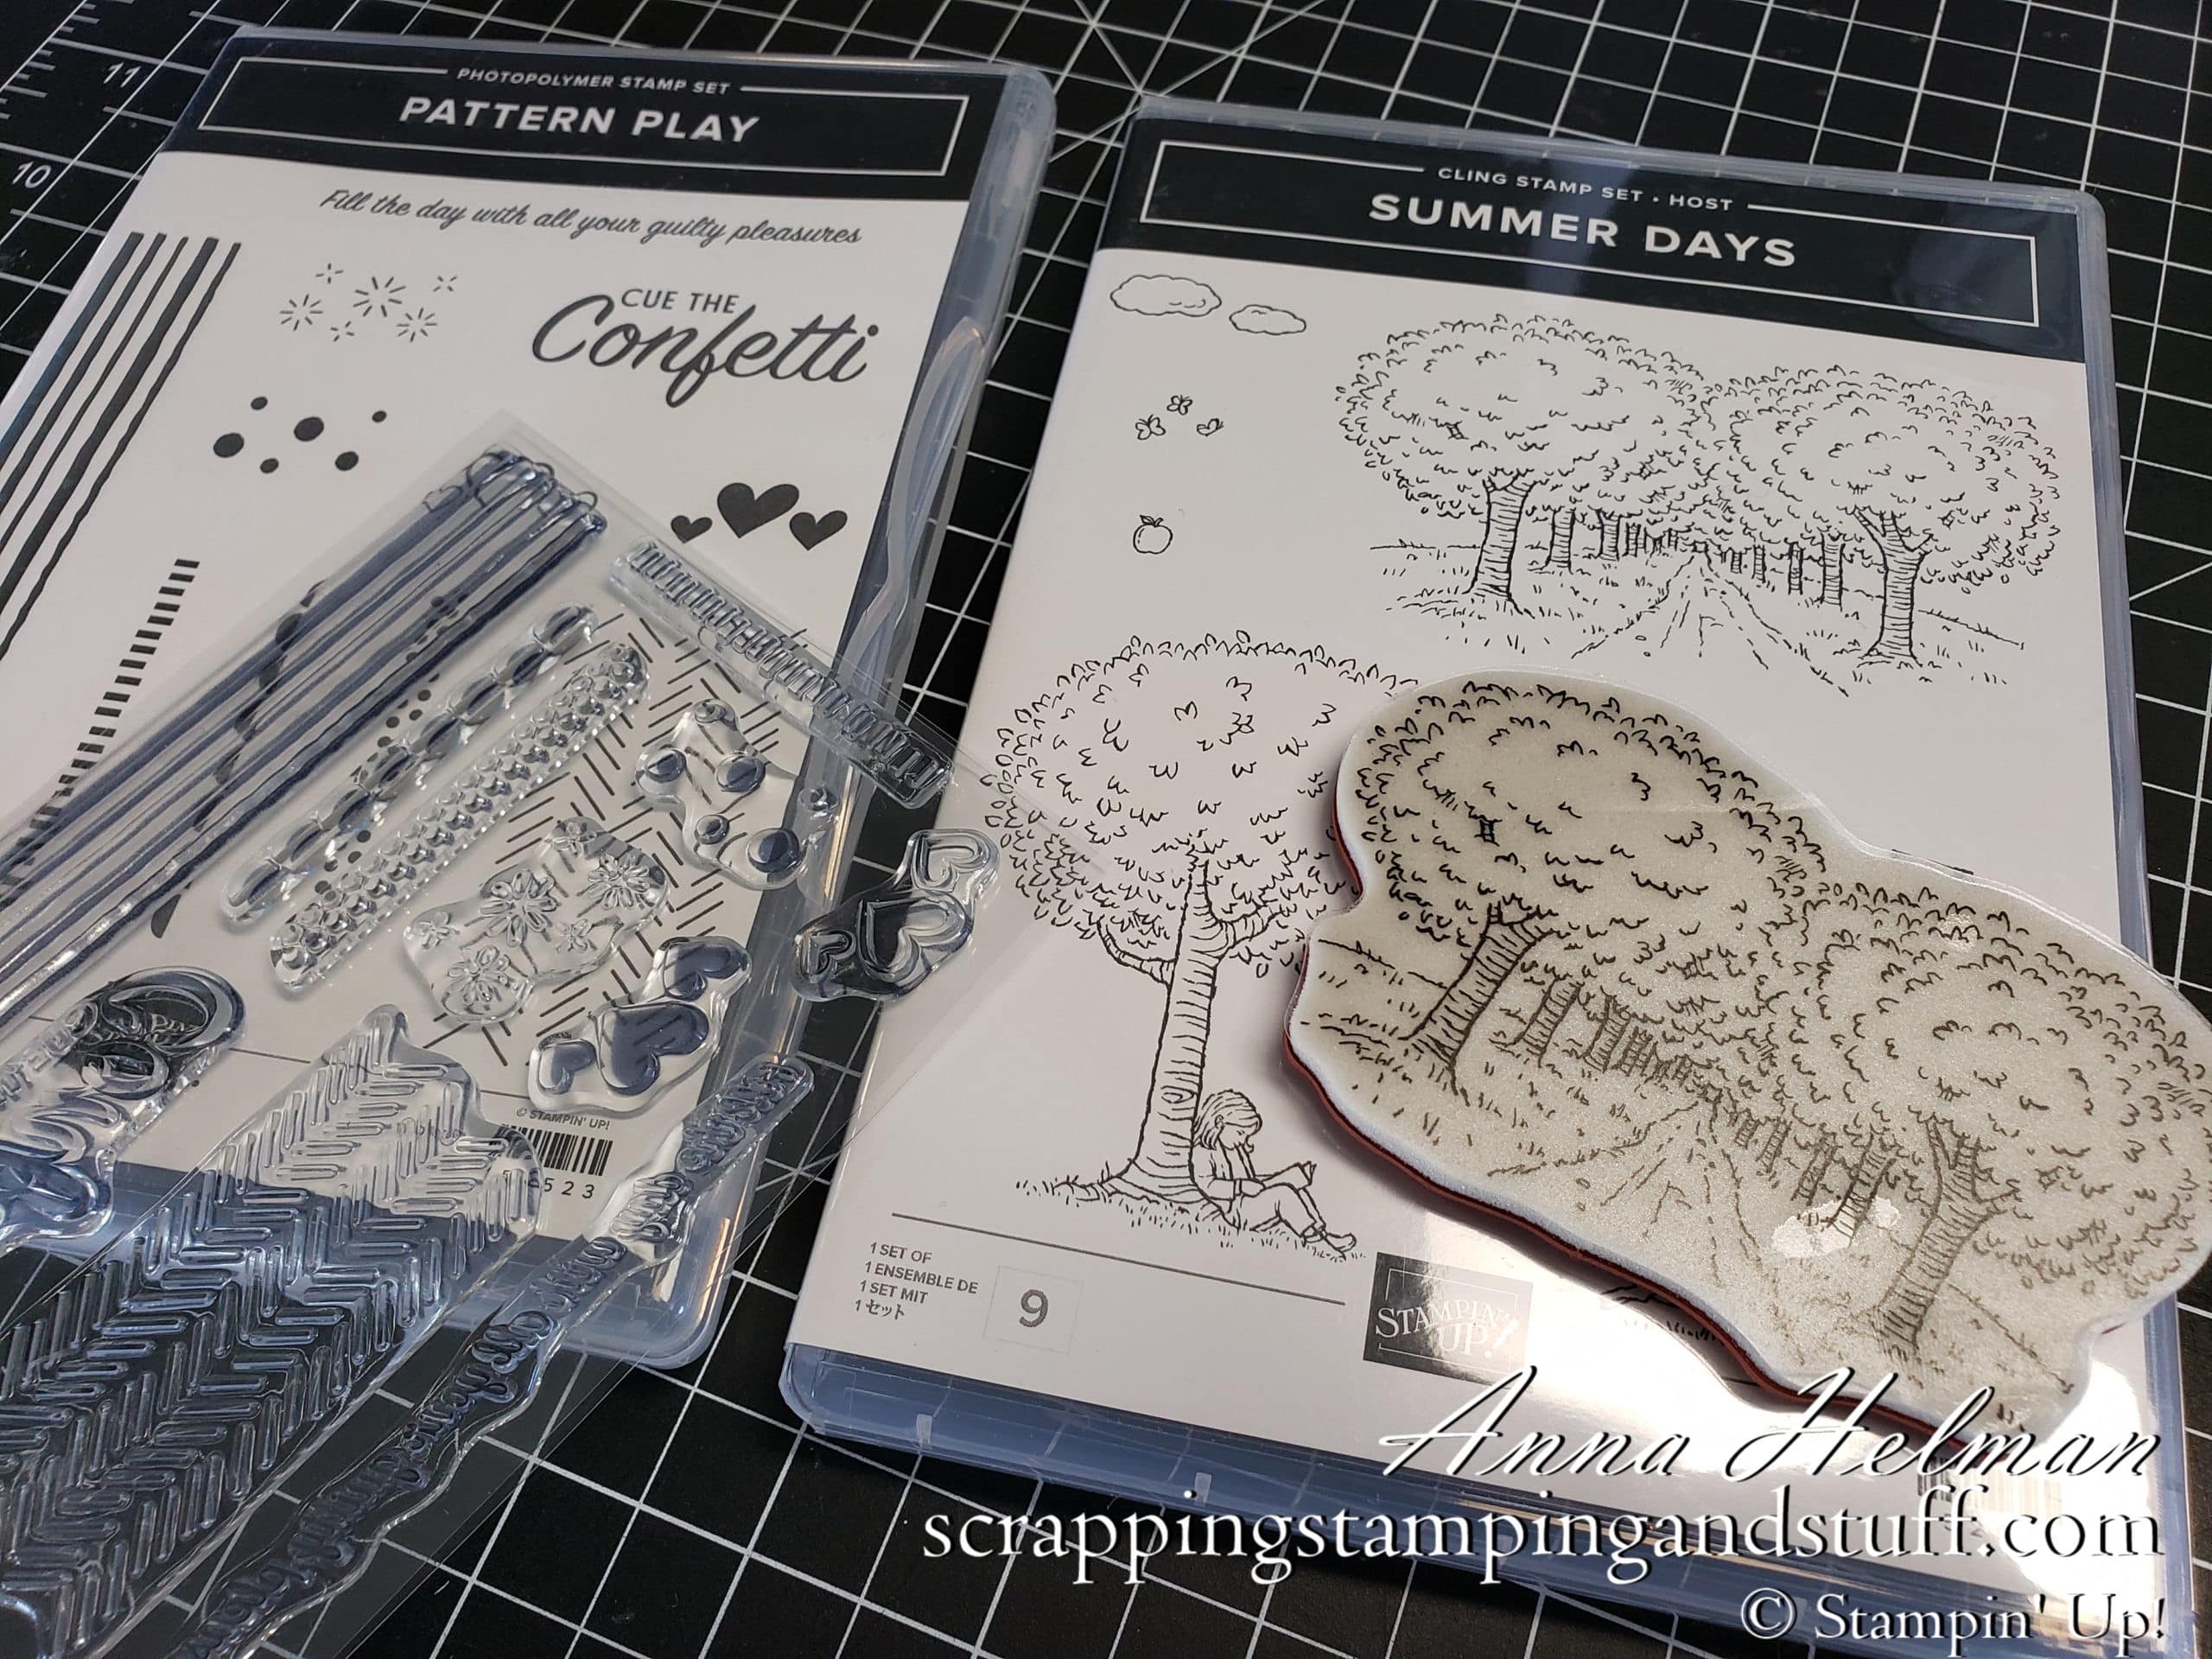 Quick Tips For Prepping Your Stampin Up Stamp Sets